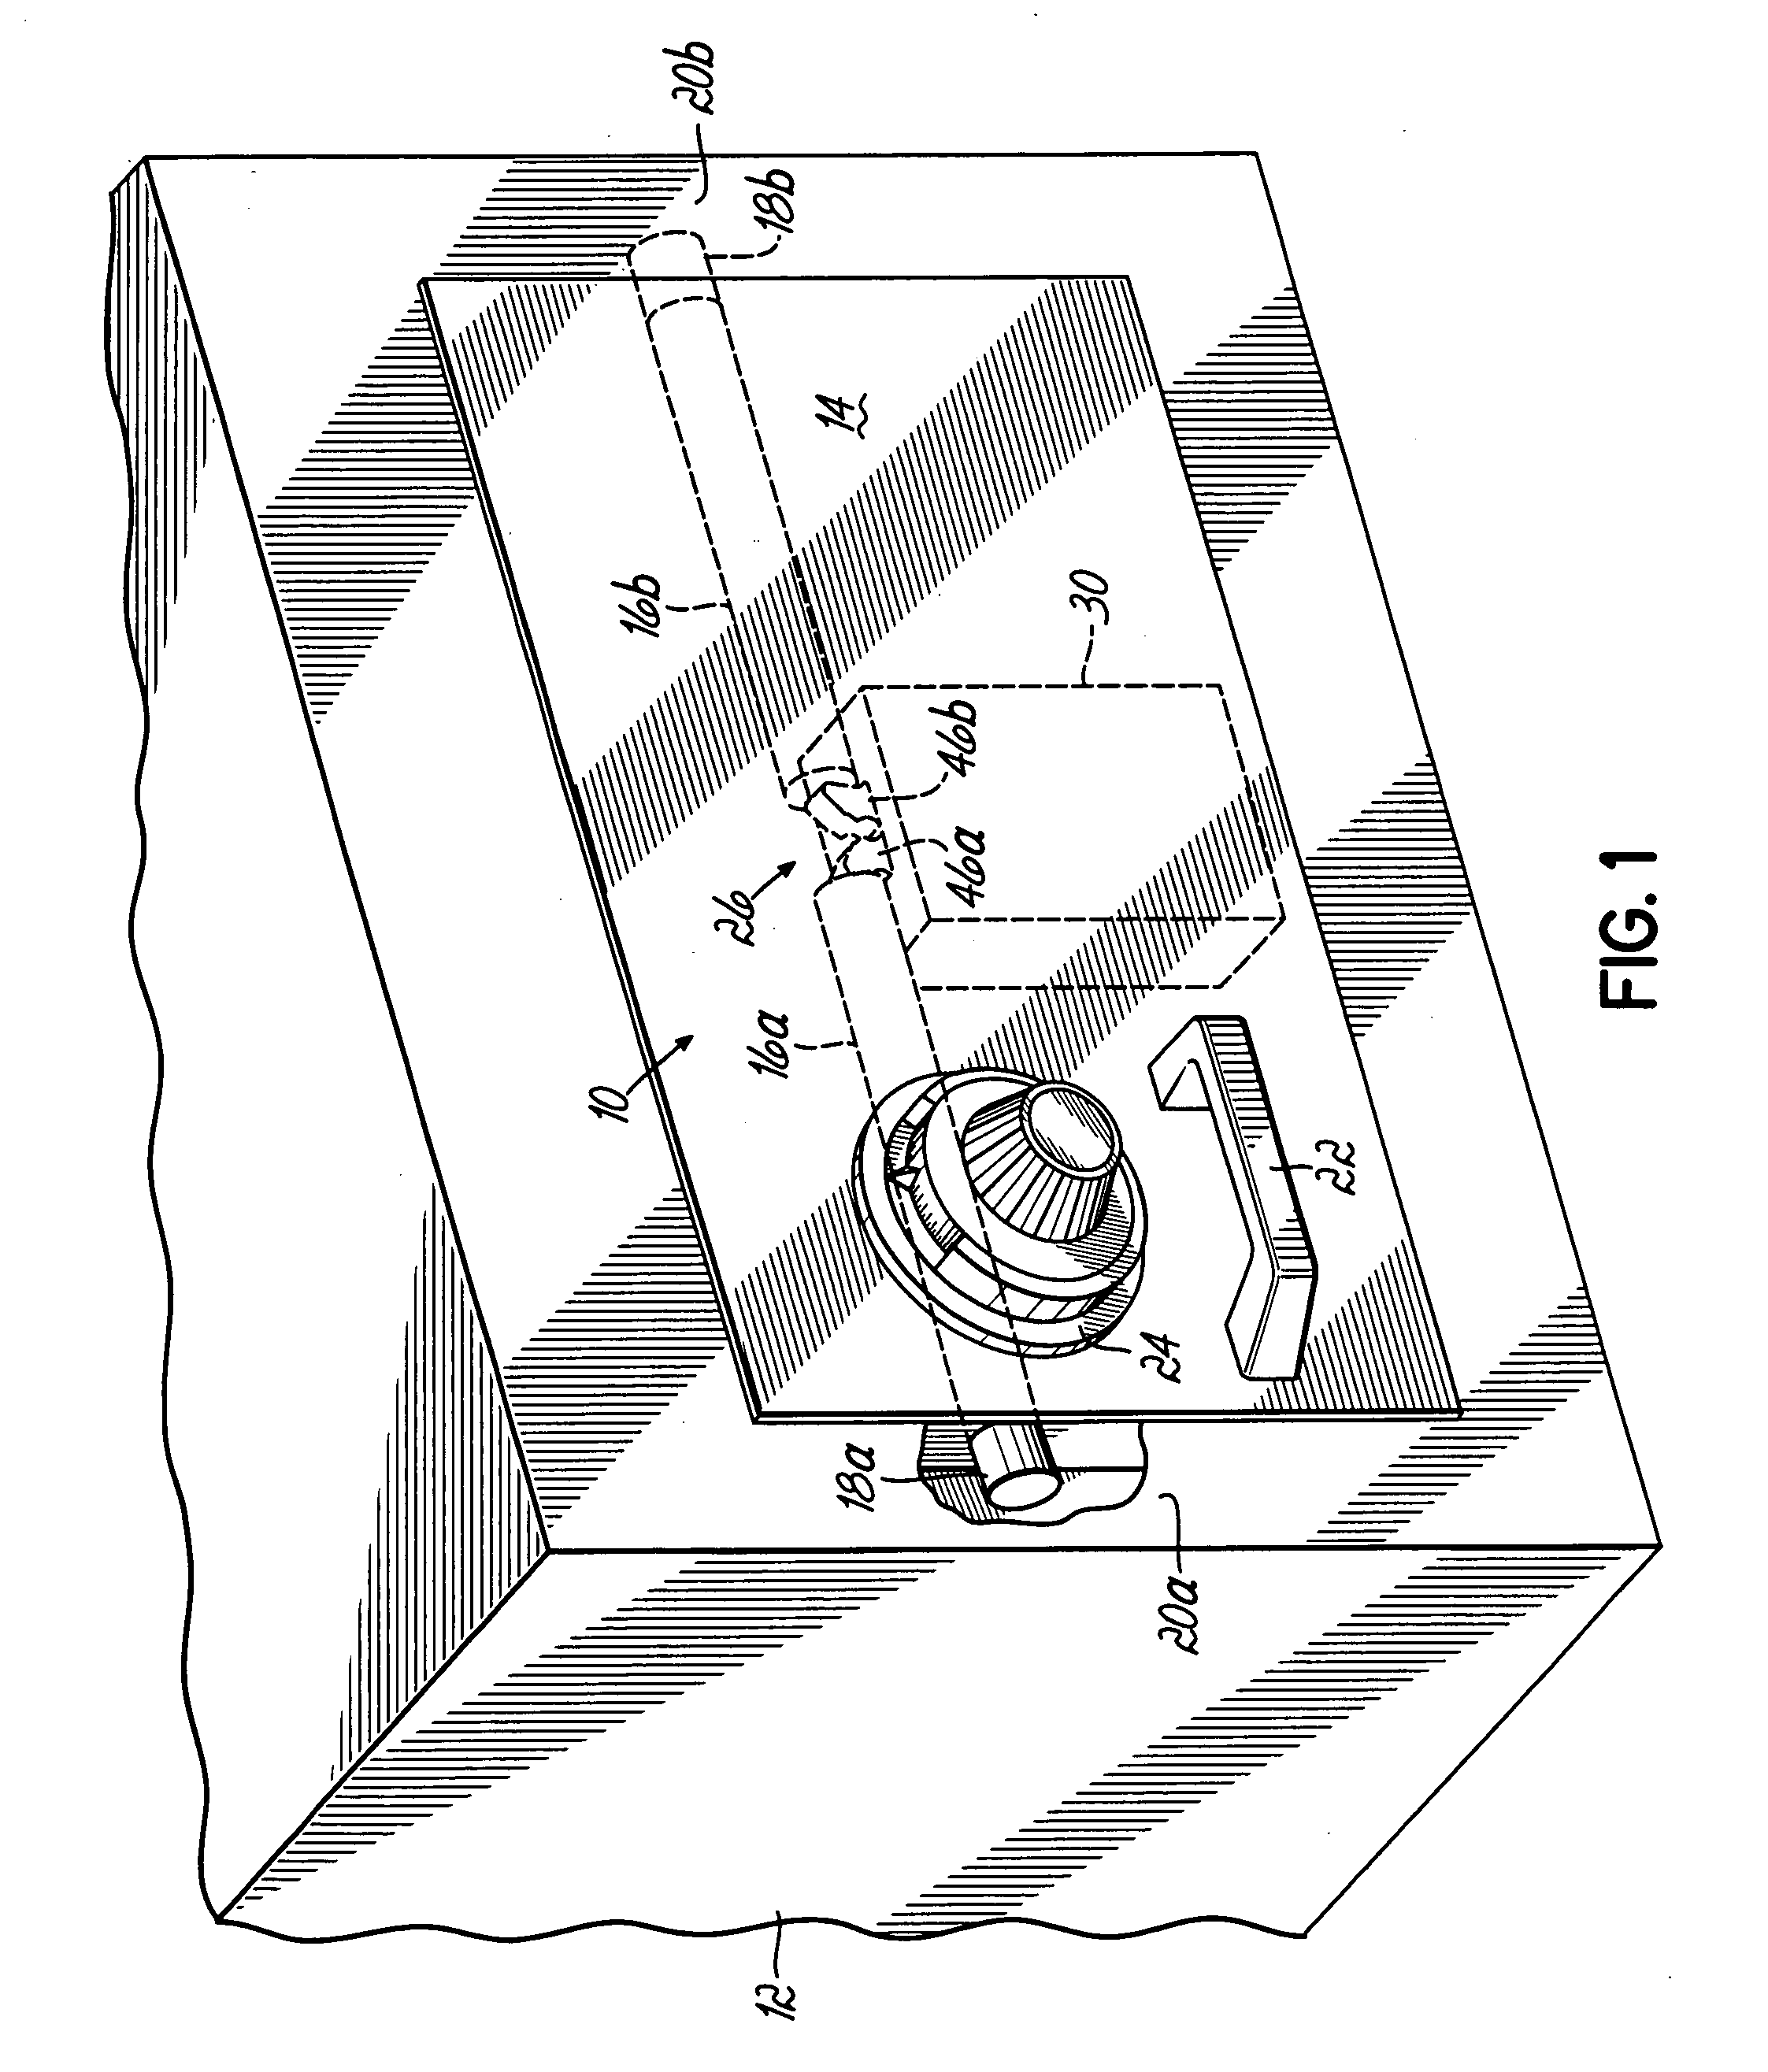 Lock bolt release system and method